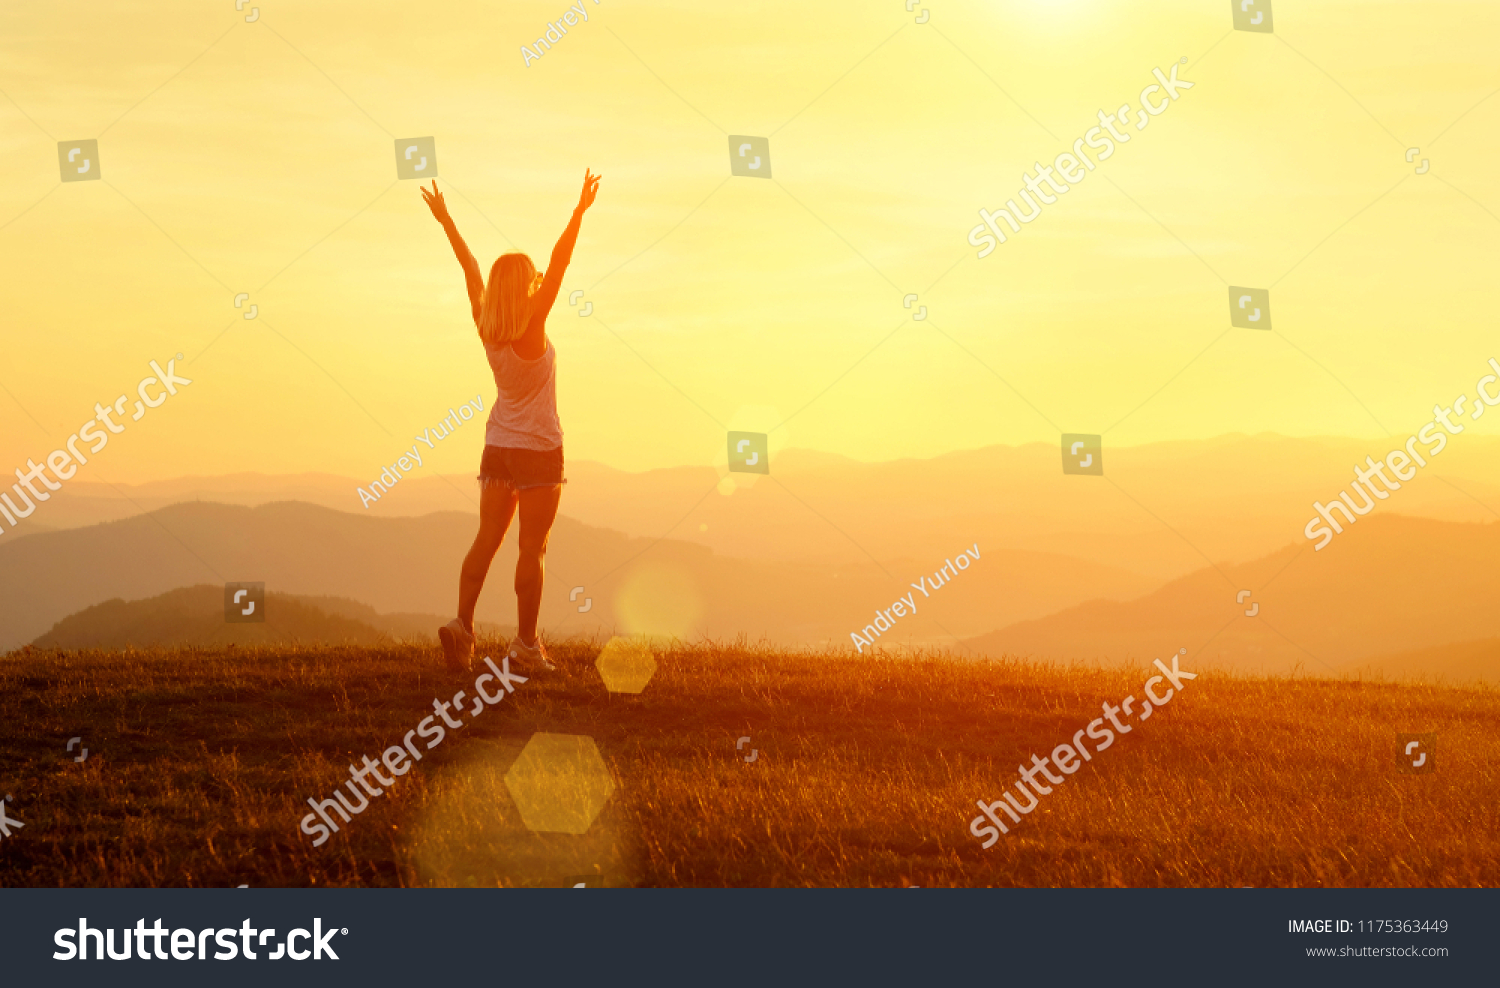 Happy woman with open arms stay on the peak of the mountain cliff edge under sunset light sky enjoying the success, freedom and bright future. #1175363449